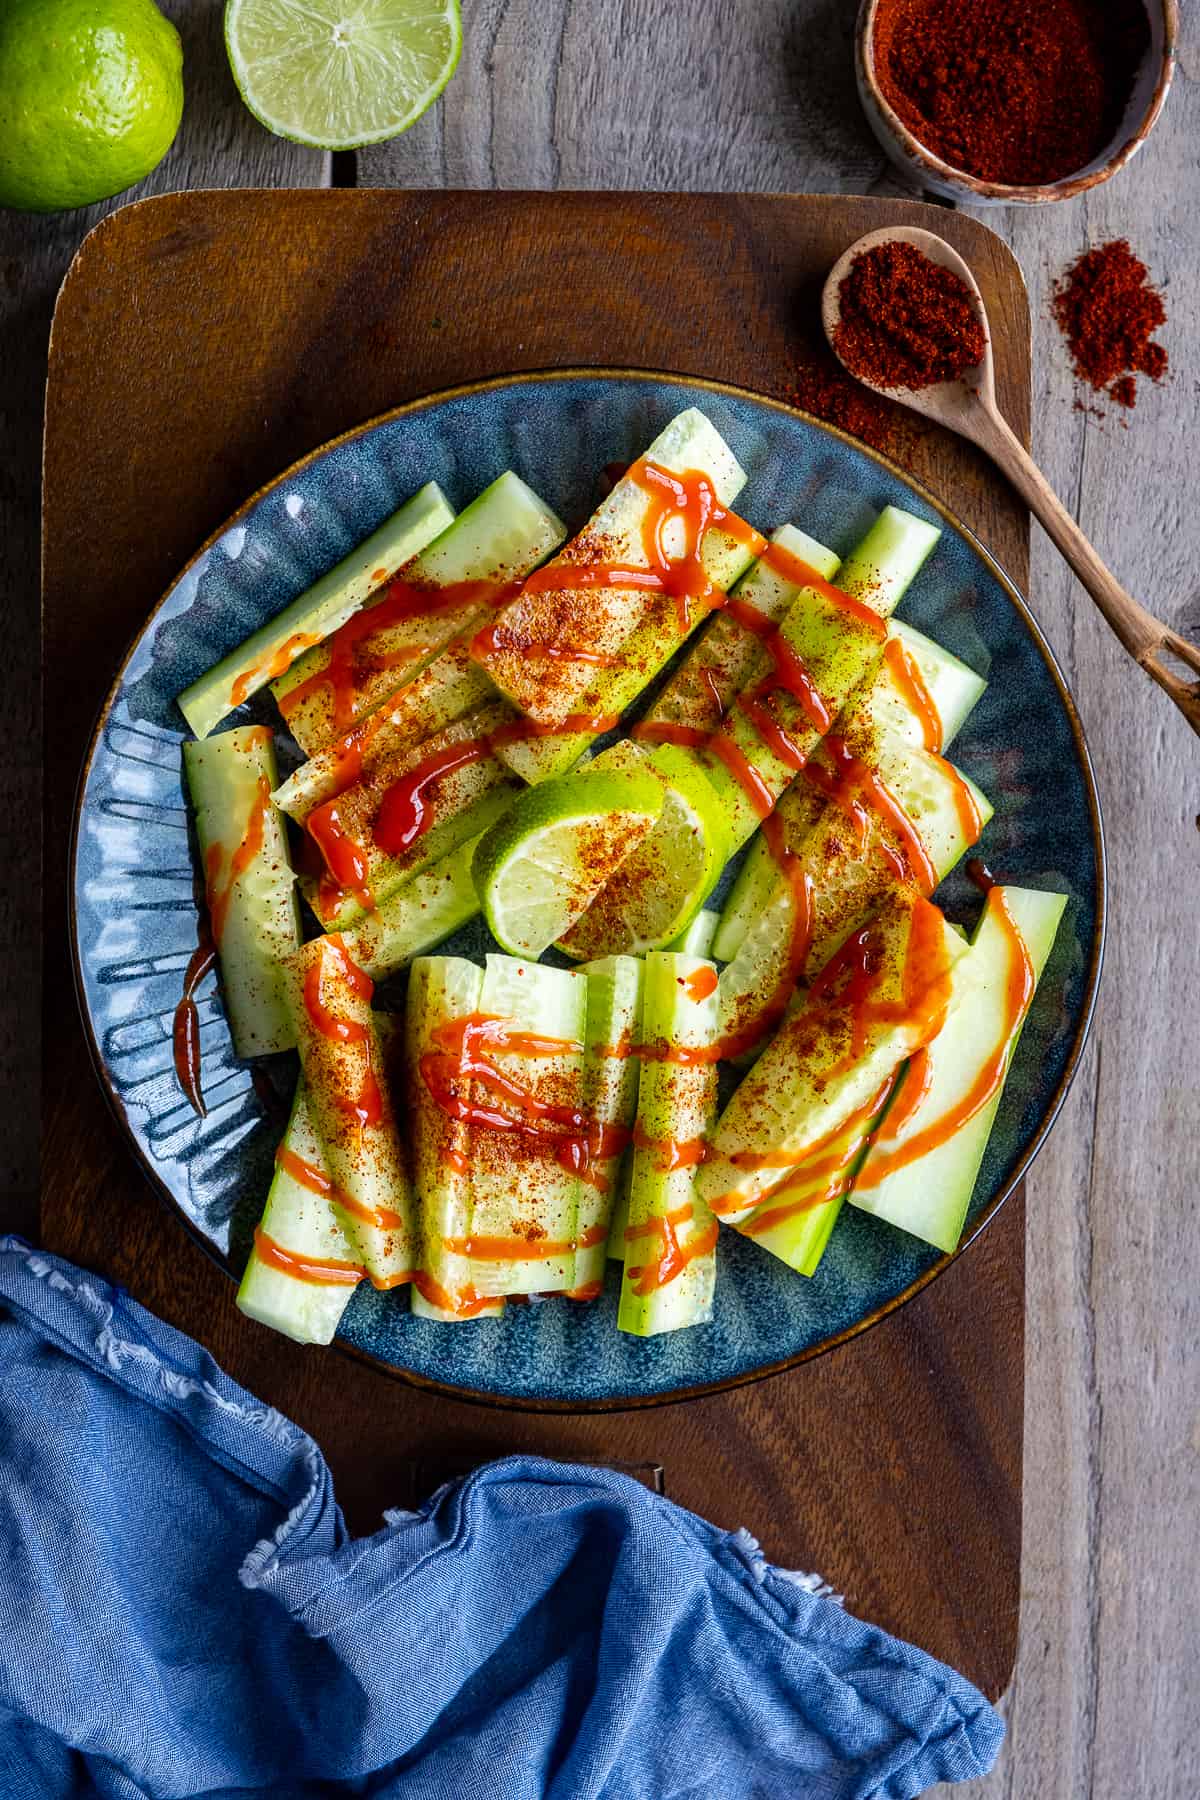 Sliced cucumber flavored with chili powder and hot salsa drizzled on them.